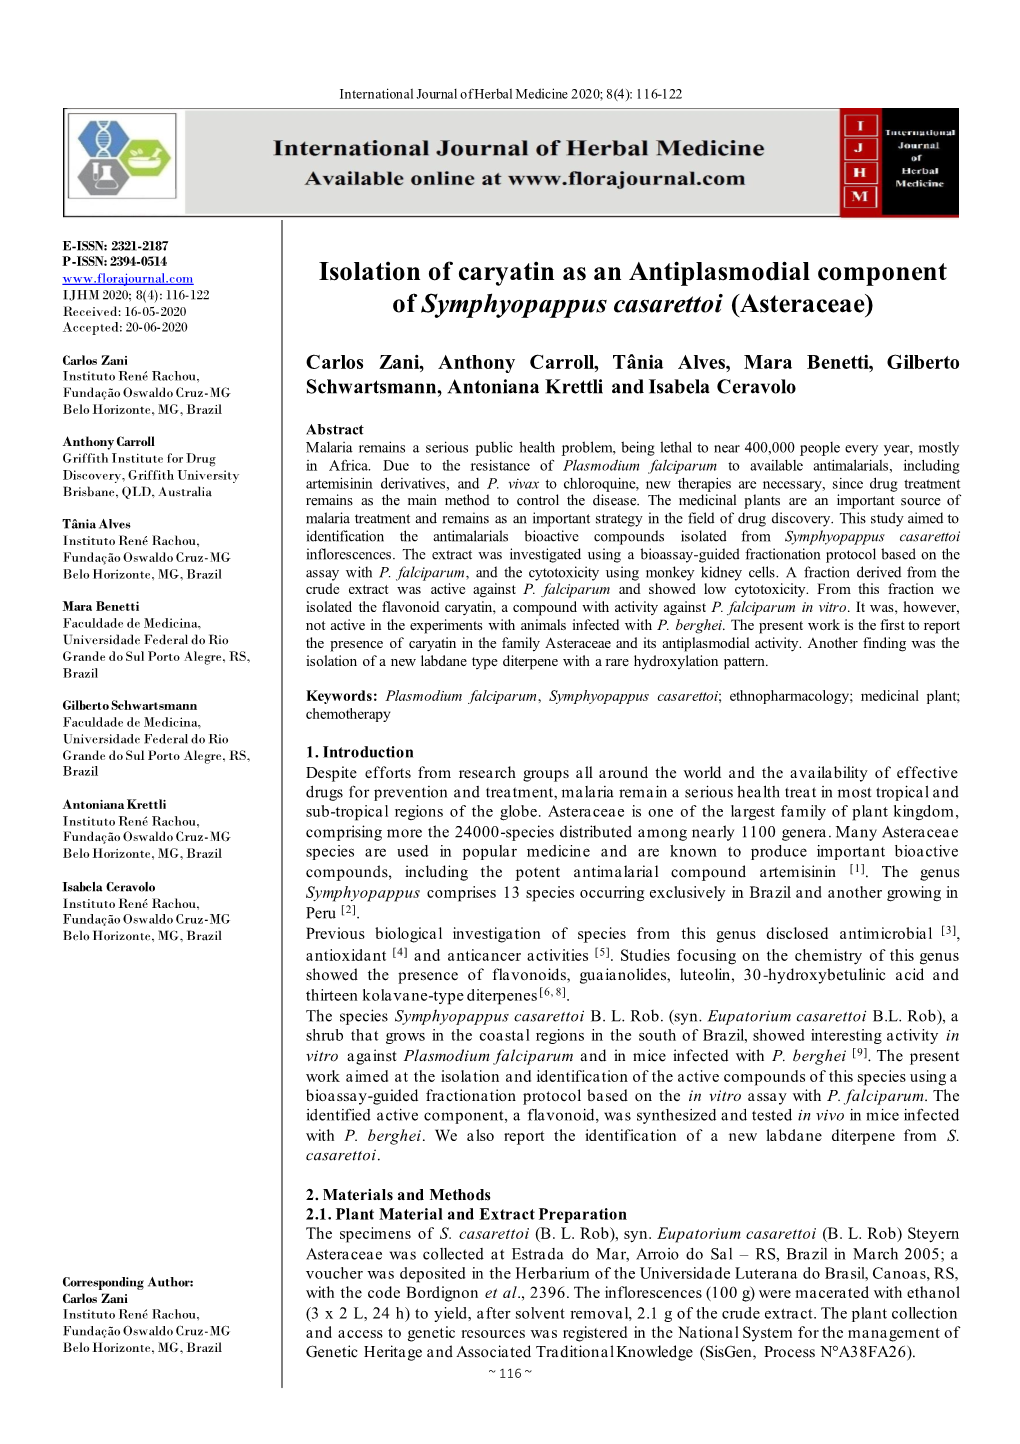 Isolation of Caryatin As an Antiplasmodial Component Of